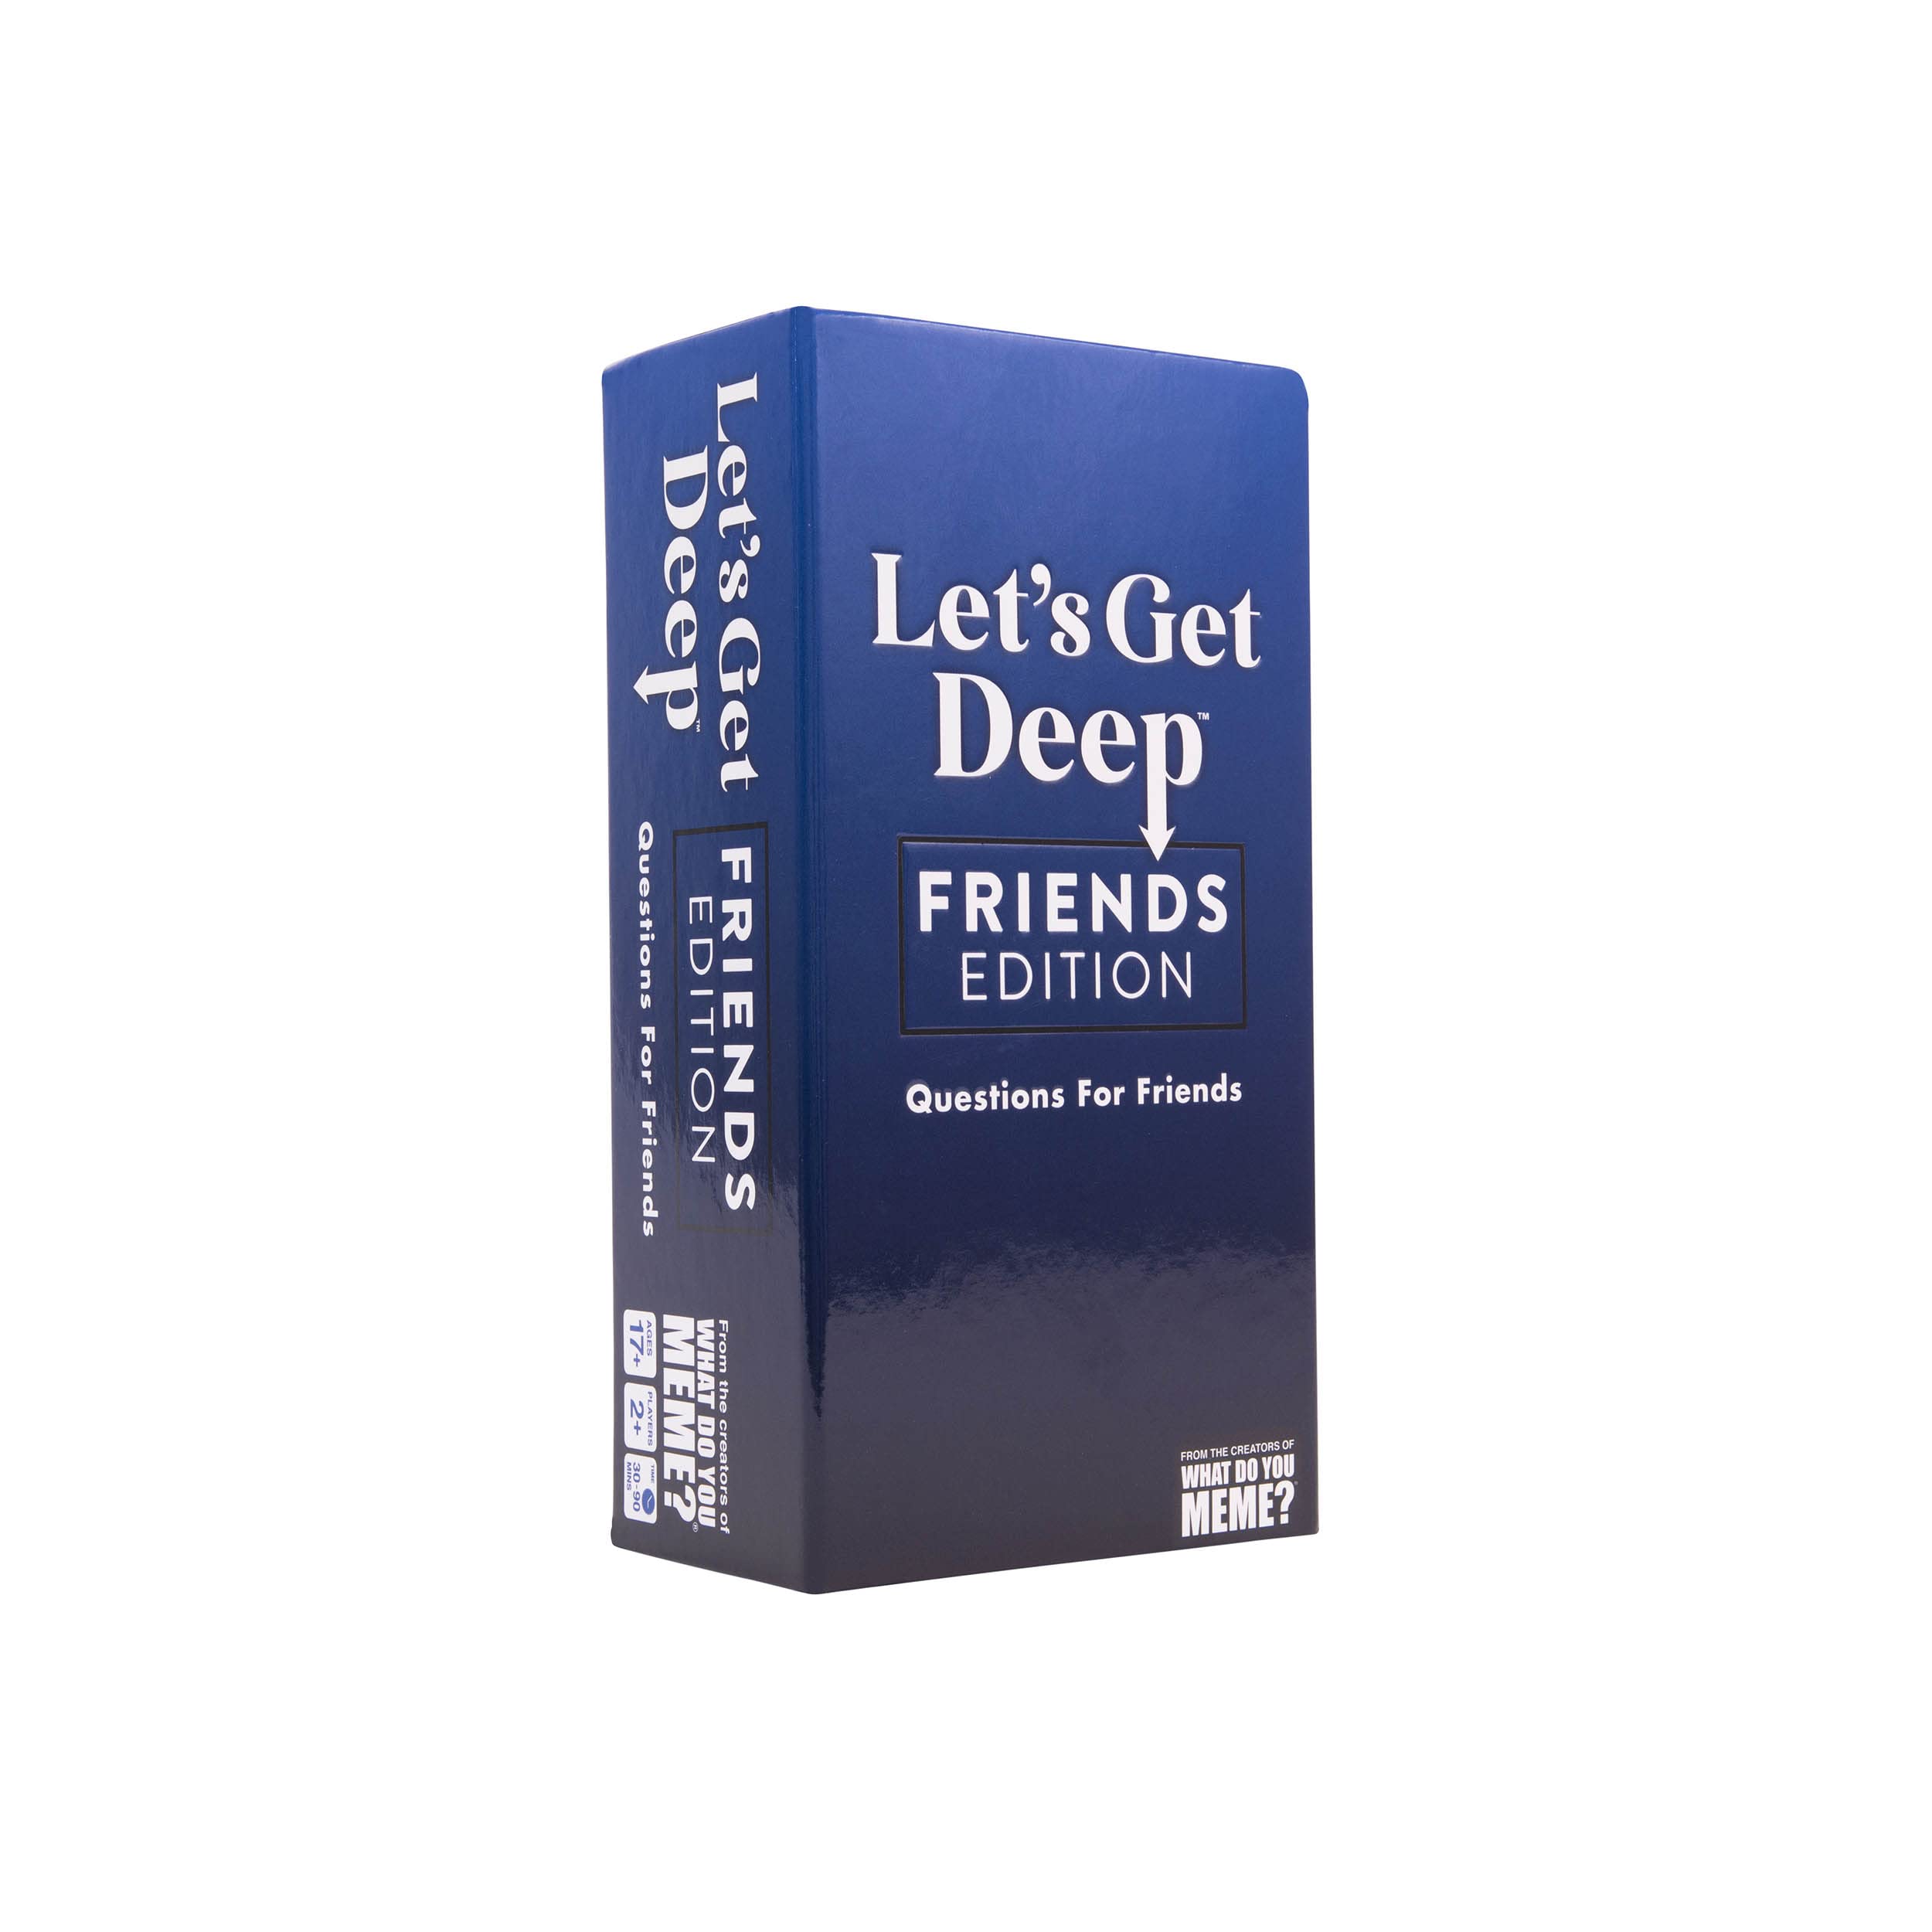 WHAT DO YOU MEME? Let's Get Deep: Friends Edition – Conversation Starter Cards for Friends & College Students